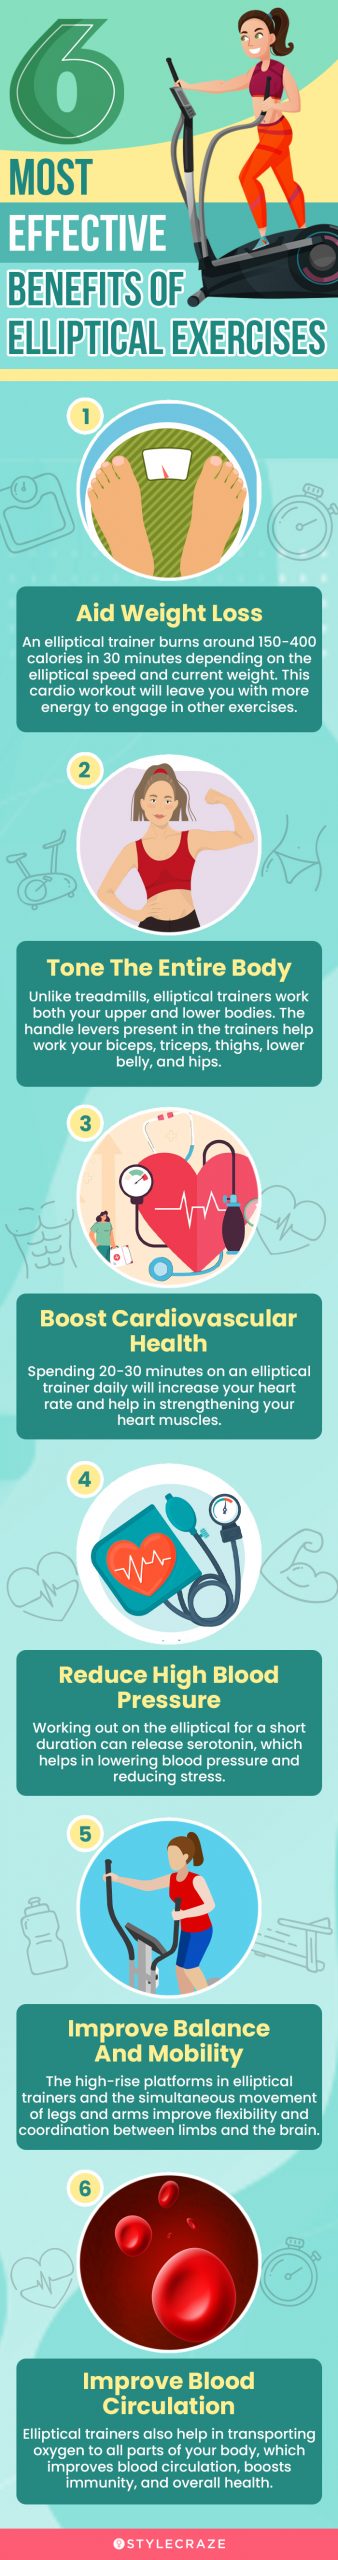 6 most effective benefits of elliptical exercises (infographic)